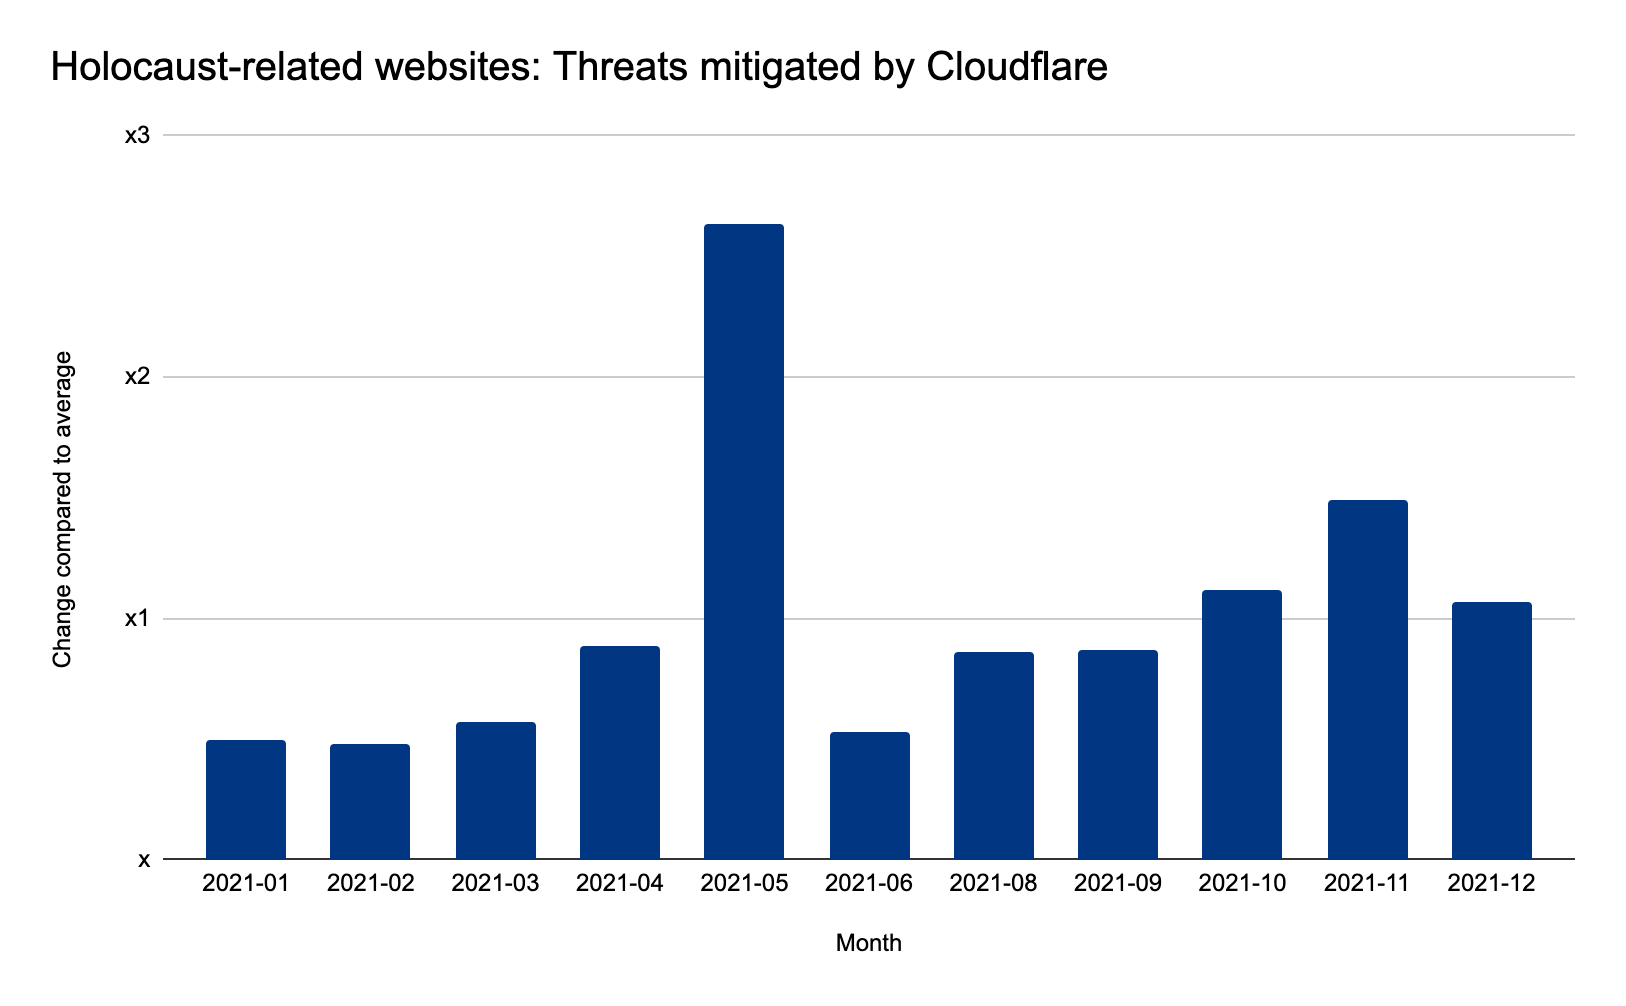 Cyber threats mitigated by Cloudflare on Holocaust-related websites